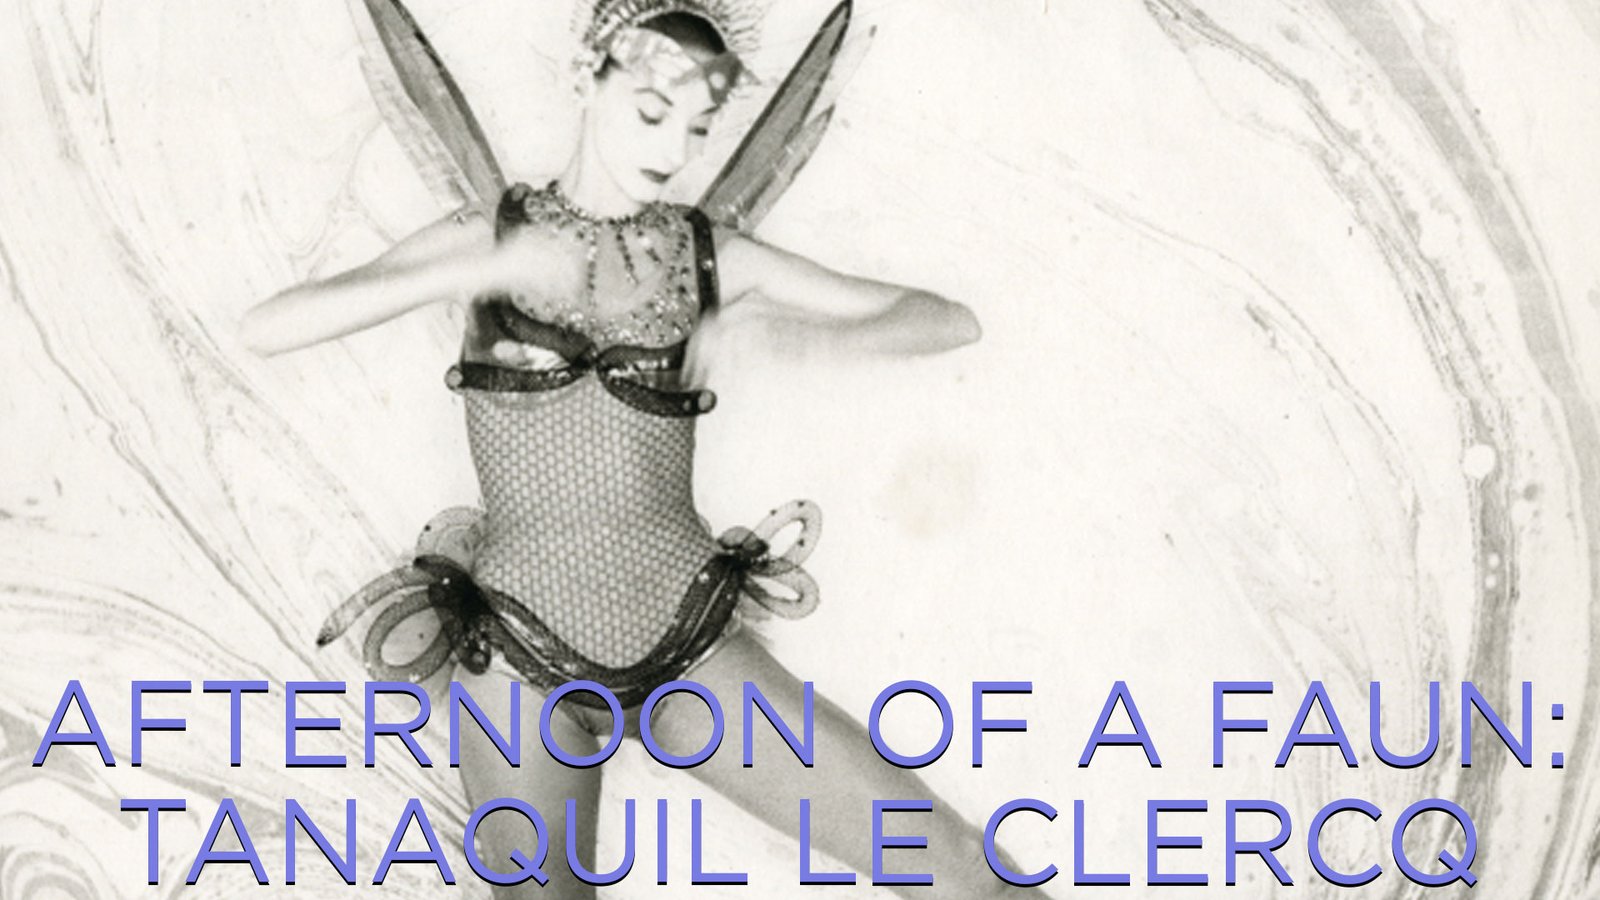 Afternoon of a Faun: Tanaquil Le Clercq